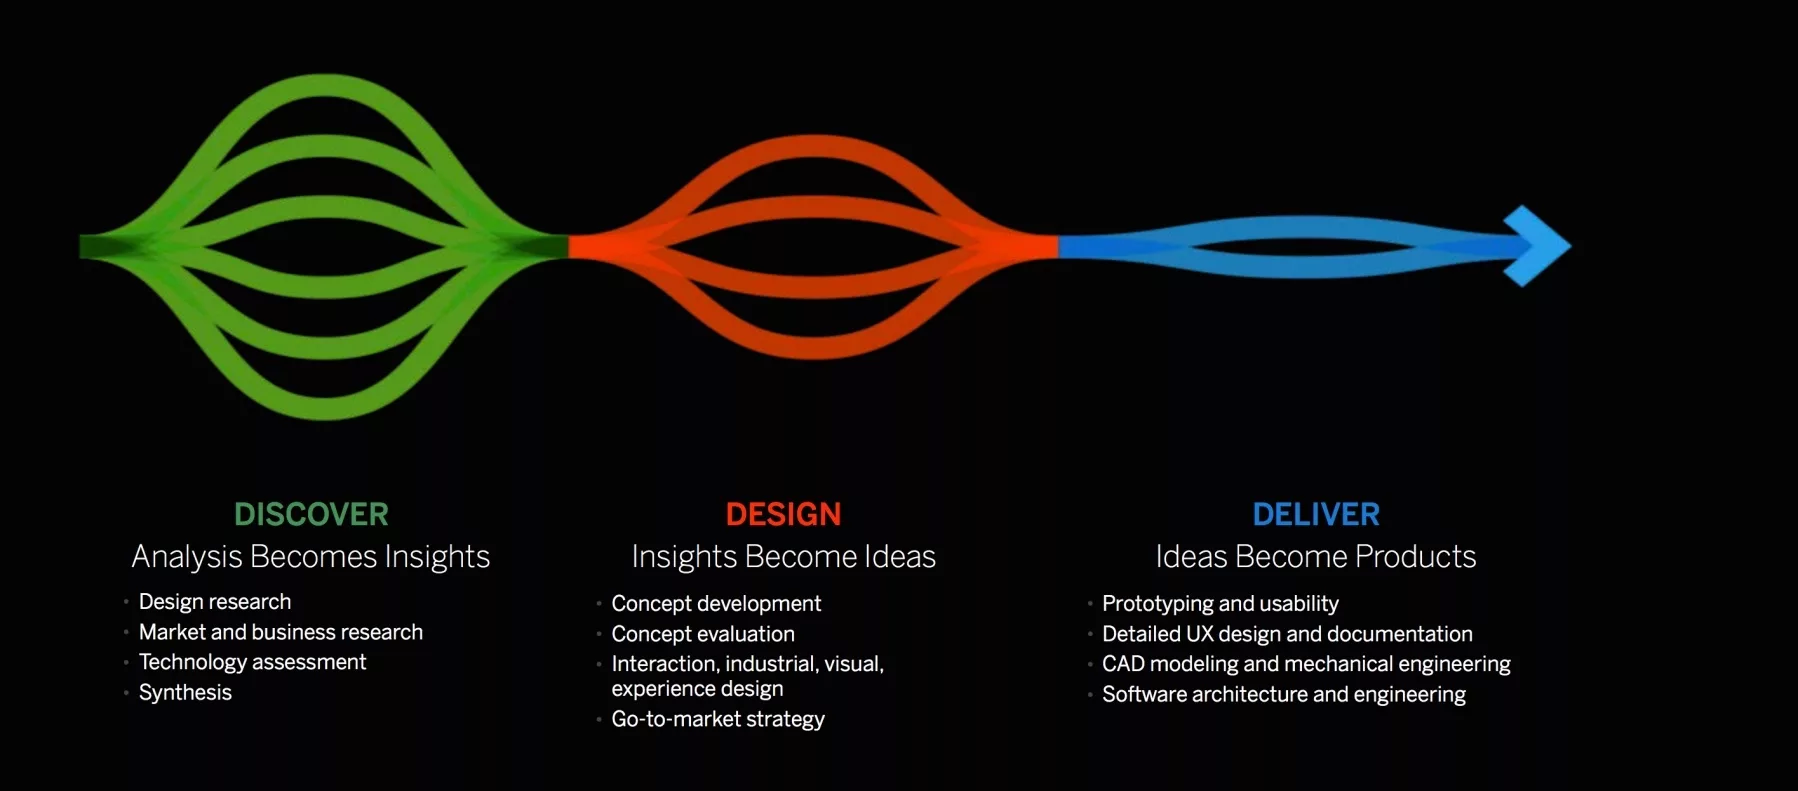 Frog Design's Service Design process that features three phases. Discover (Analysis becomes insights), Design (Insights become Ideas) and Deliver (Ideas become Products).